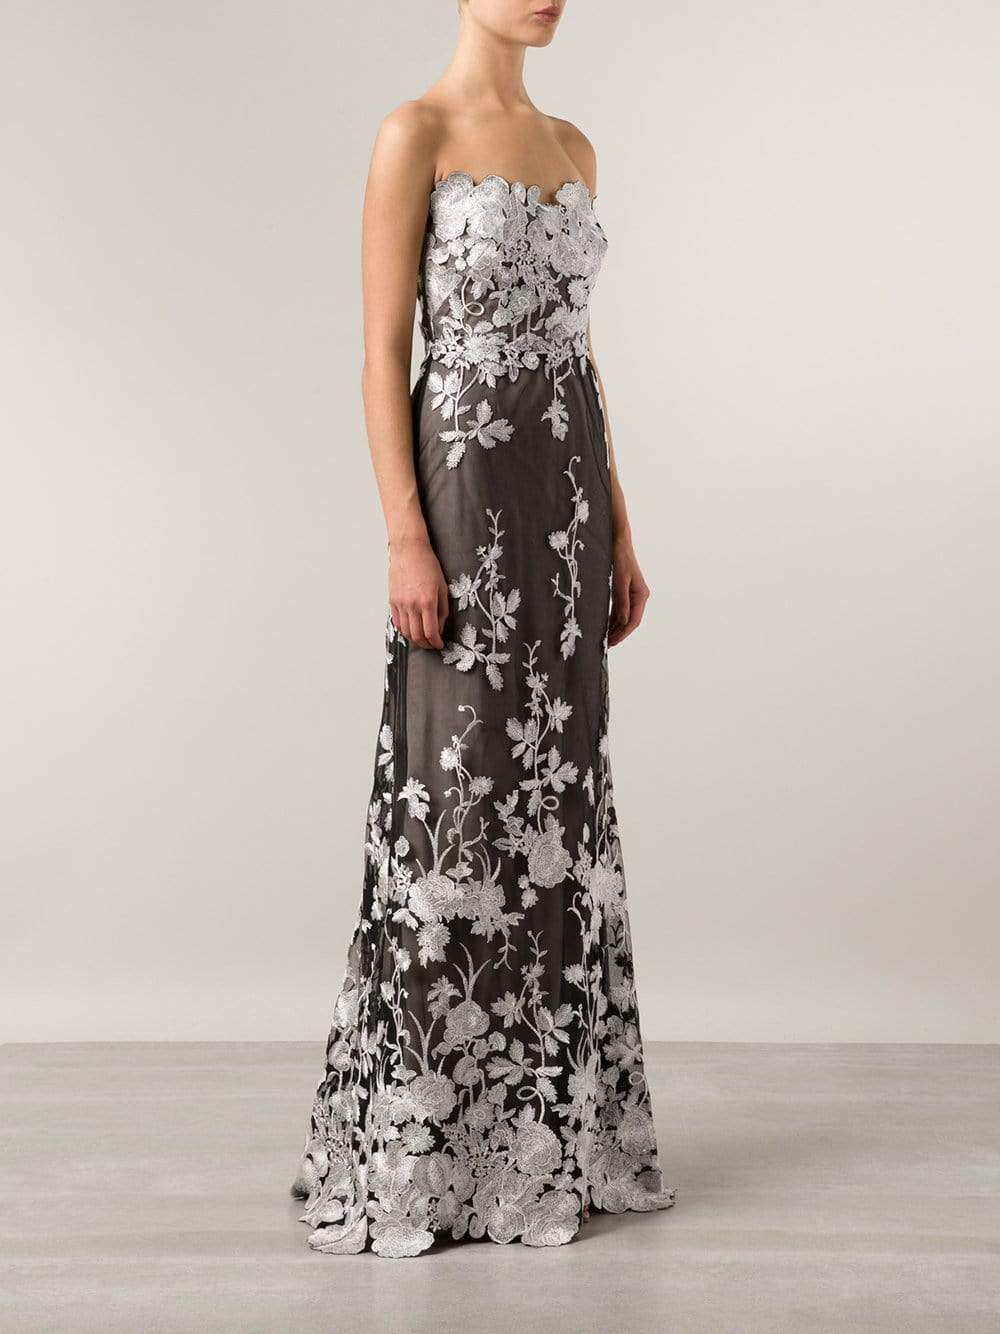 Embellished Floral Tulle Gown CLOTHINGDRESSGOWN MARCHESA NOTTE   